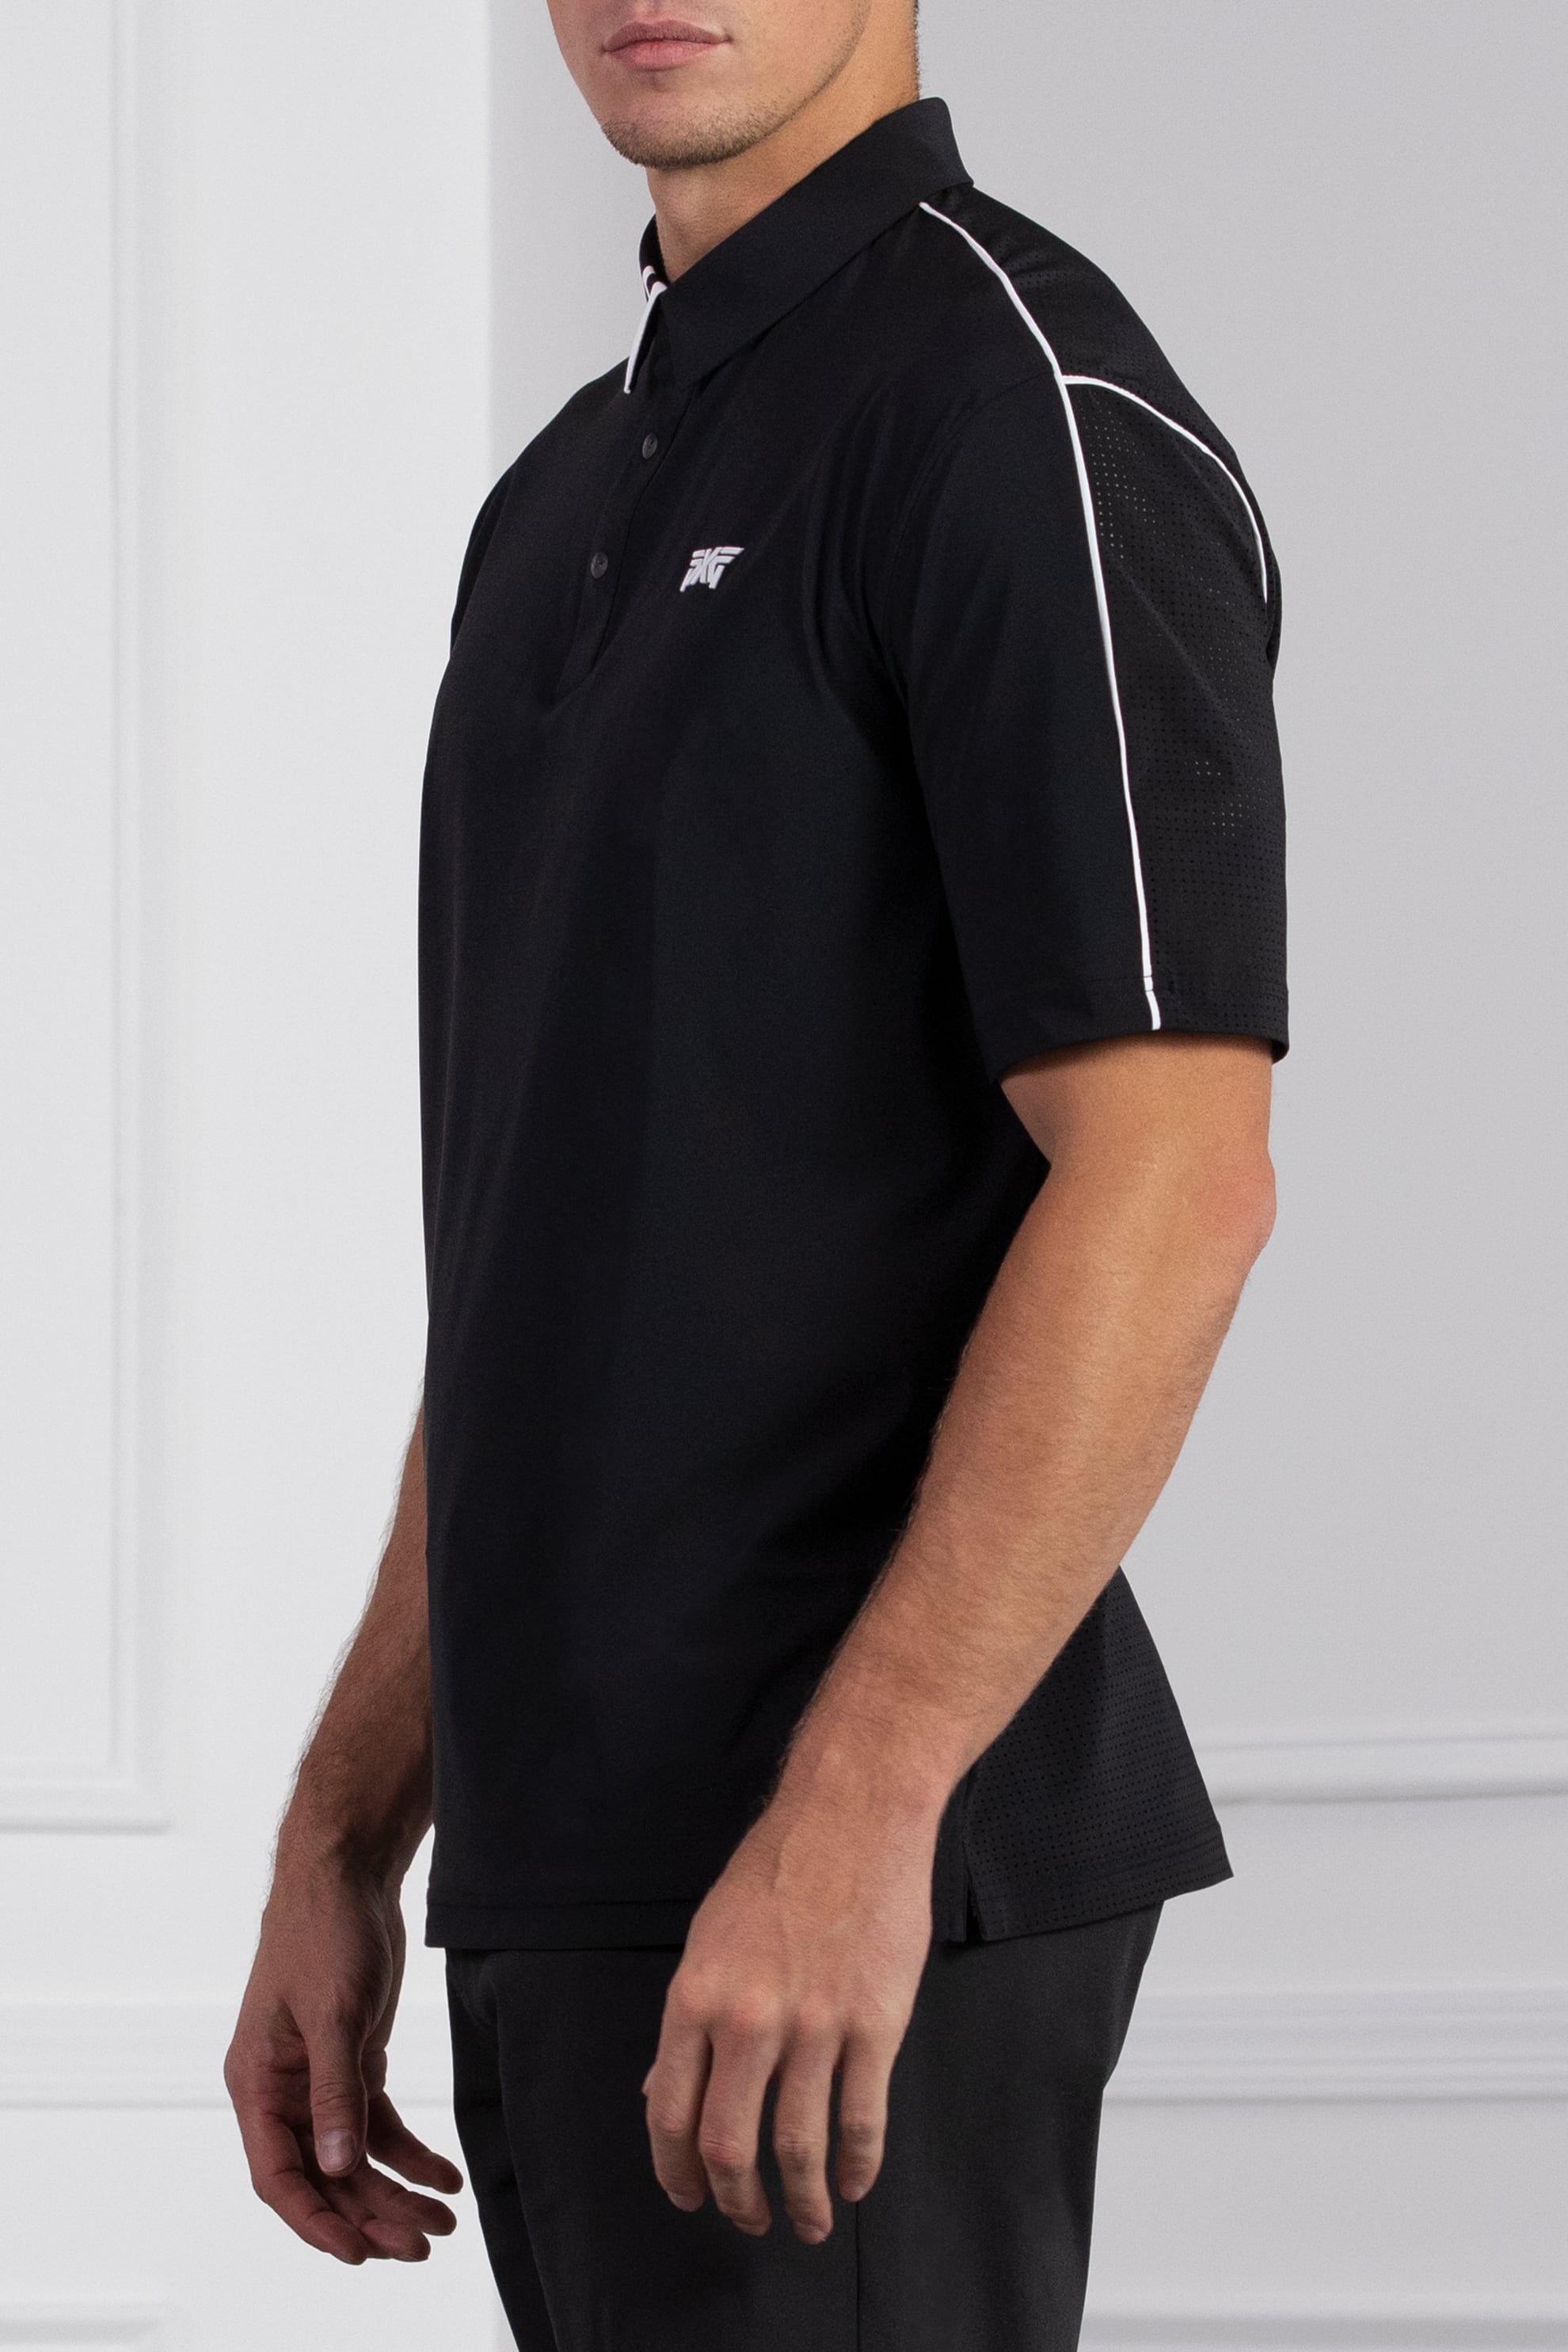 Fit Polo | the Golf Shop Clubs Golf Fineline Apparel, Accessories at Quality PXG Gear, and Comfort Highest